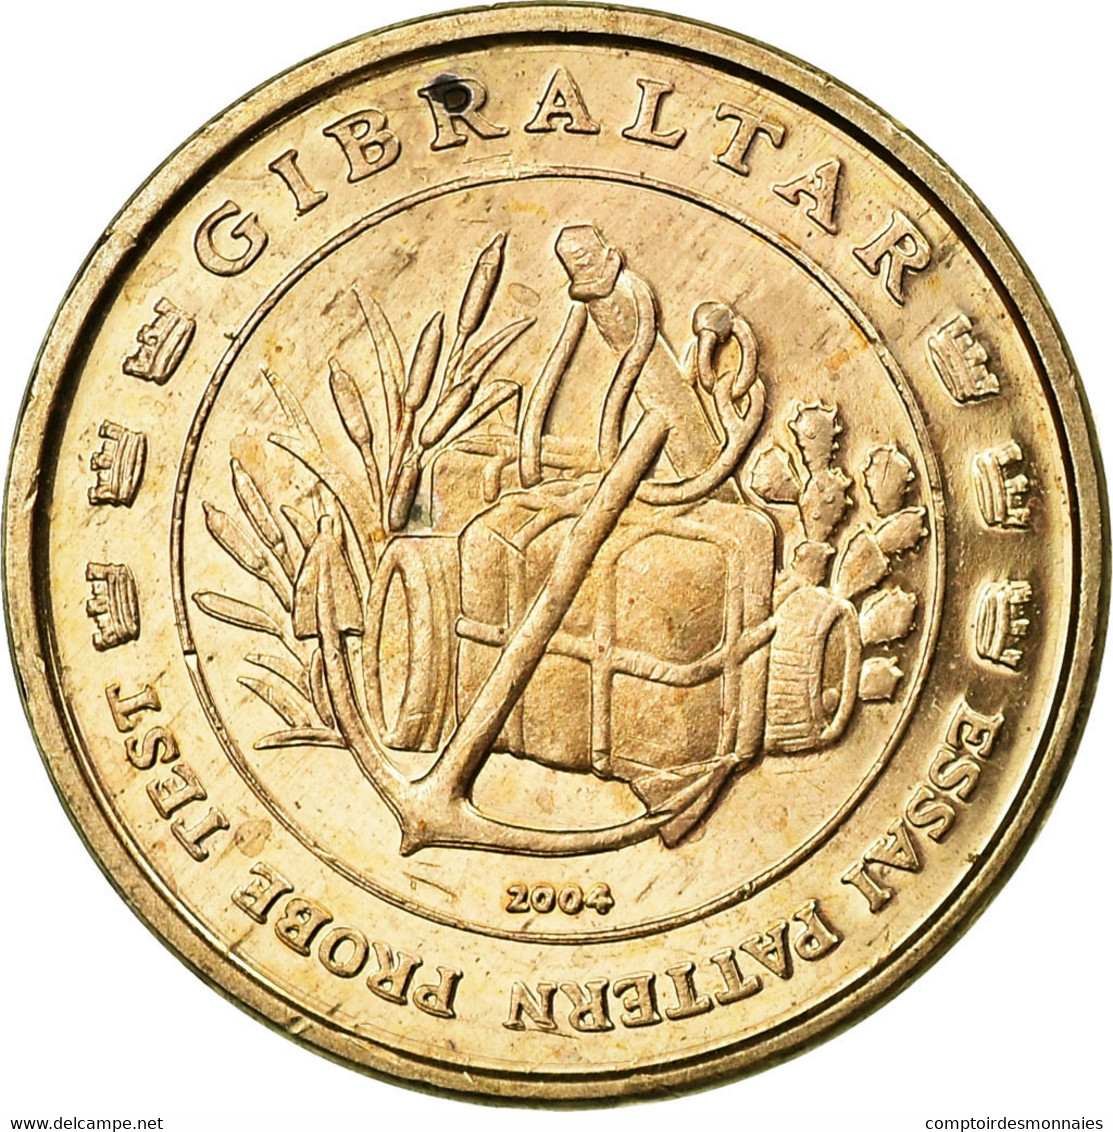 Gibraltar, Fantasy Euro Patterns, 5 Euro Cent, 2004, FDC, Copper Plated Steel - Private Proofs / Unofficial